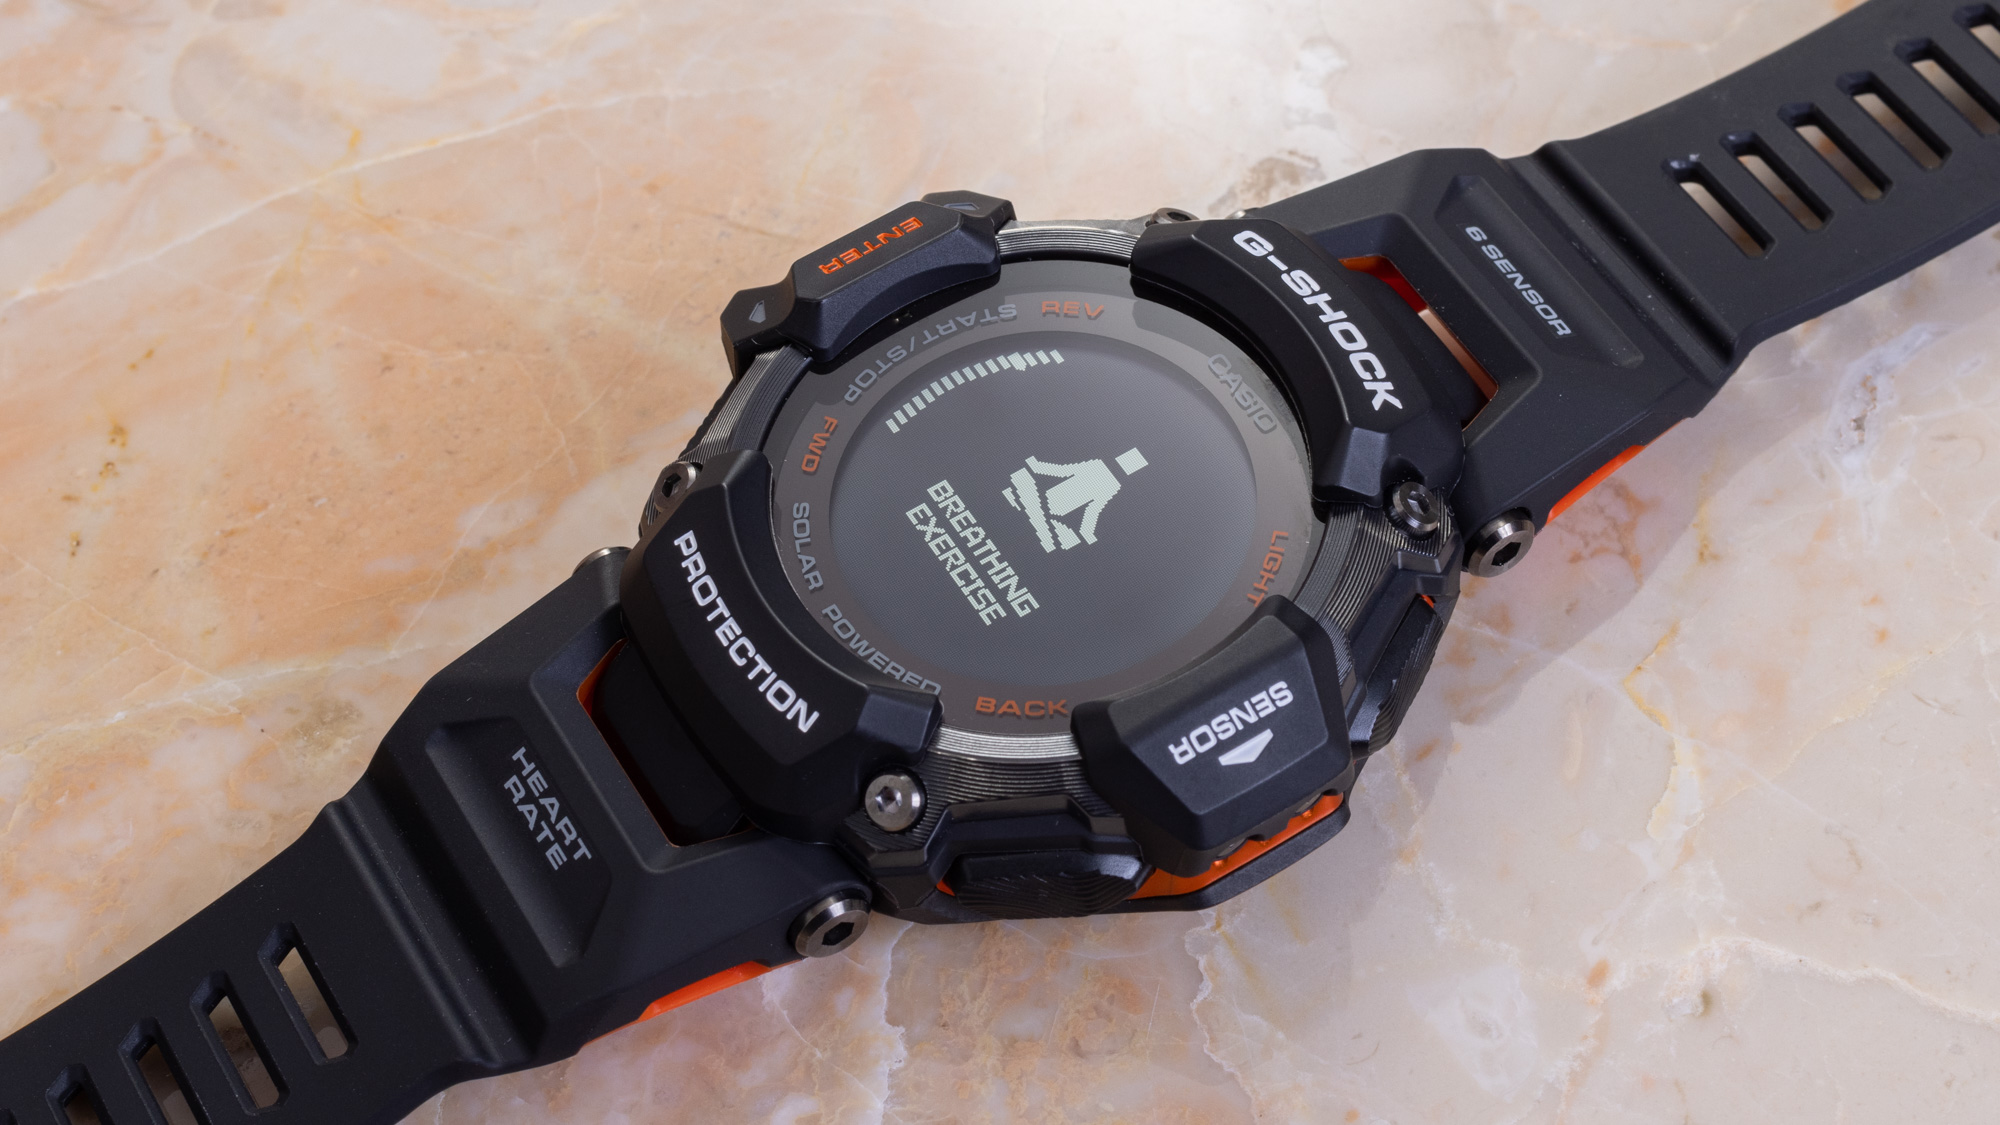 Watch Review: Casio G-Shock Move GBD-H2000 Smart Activity Tracker